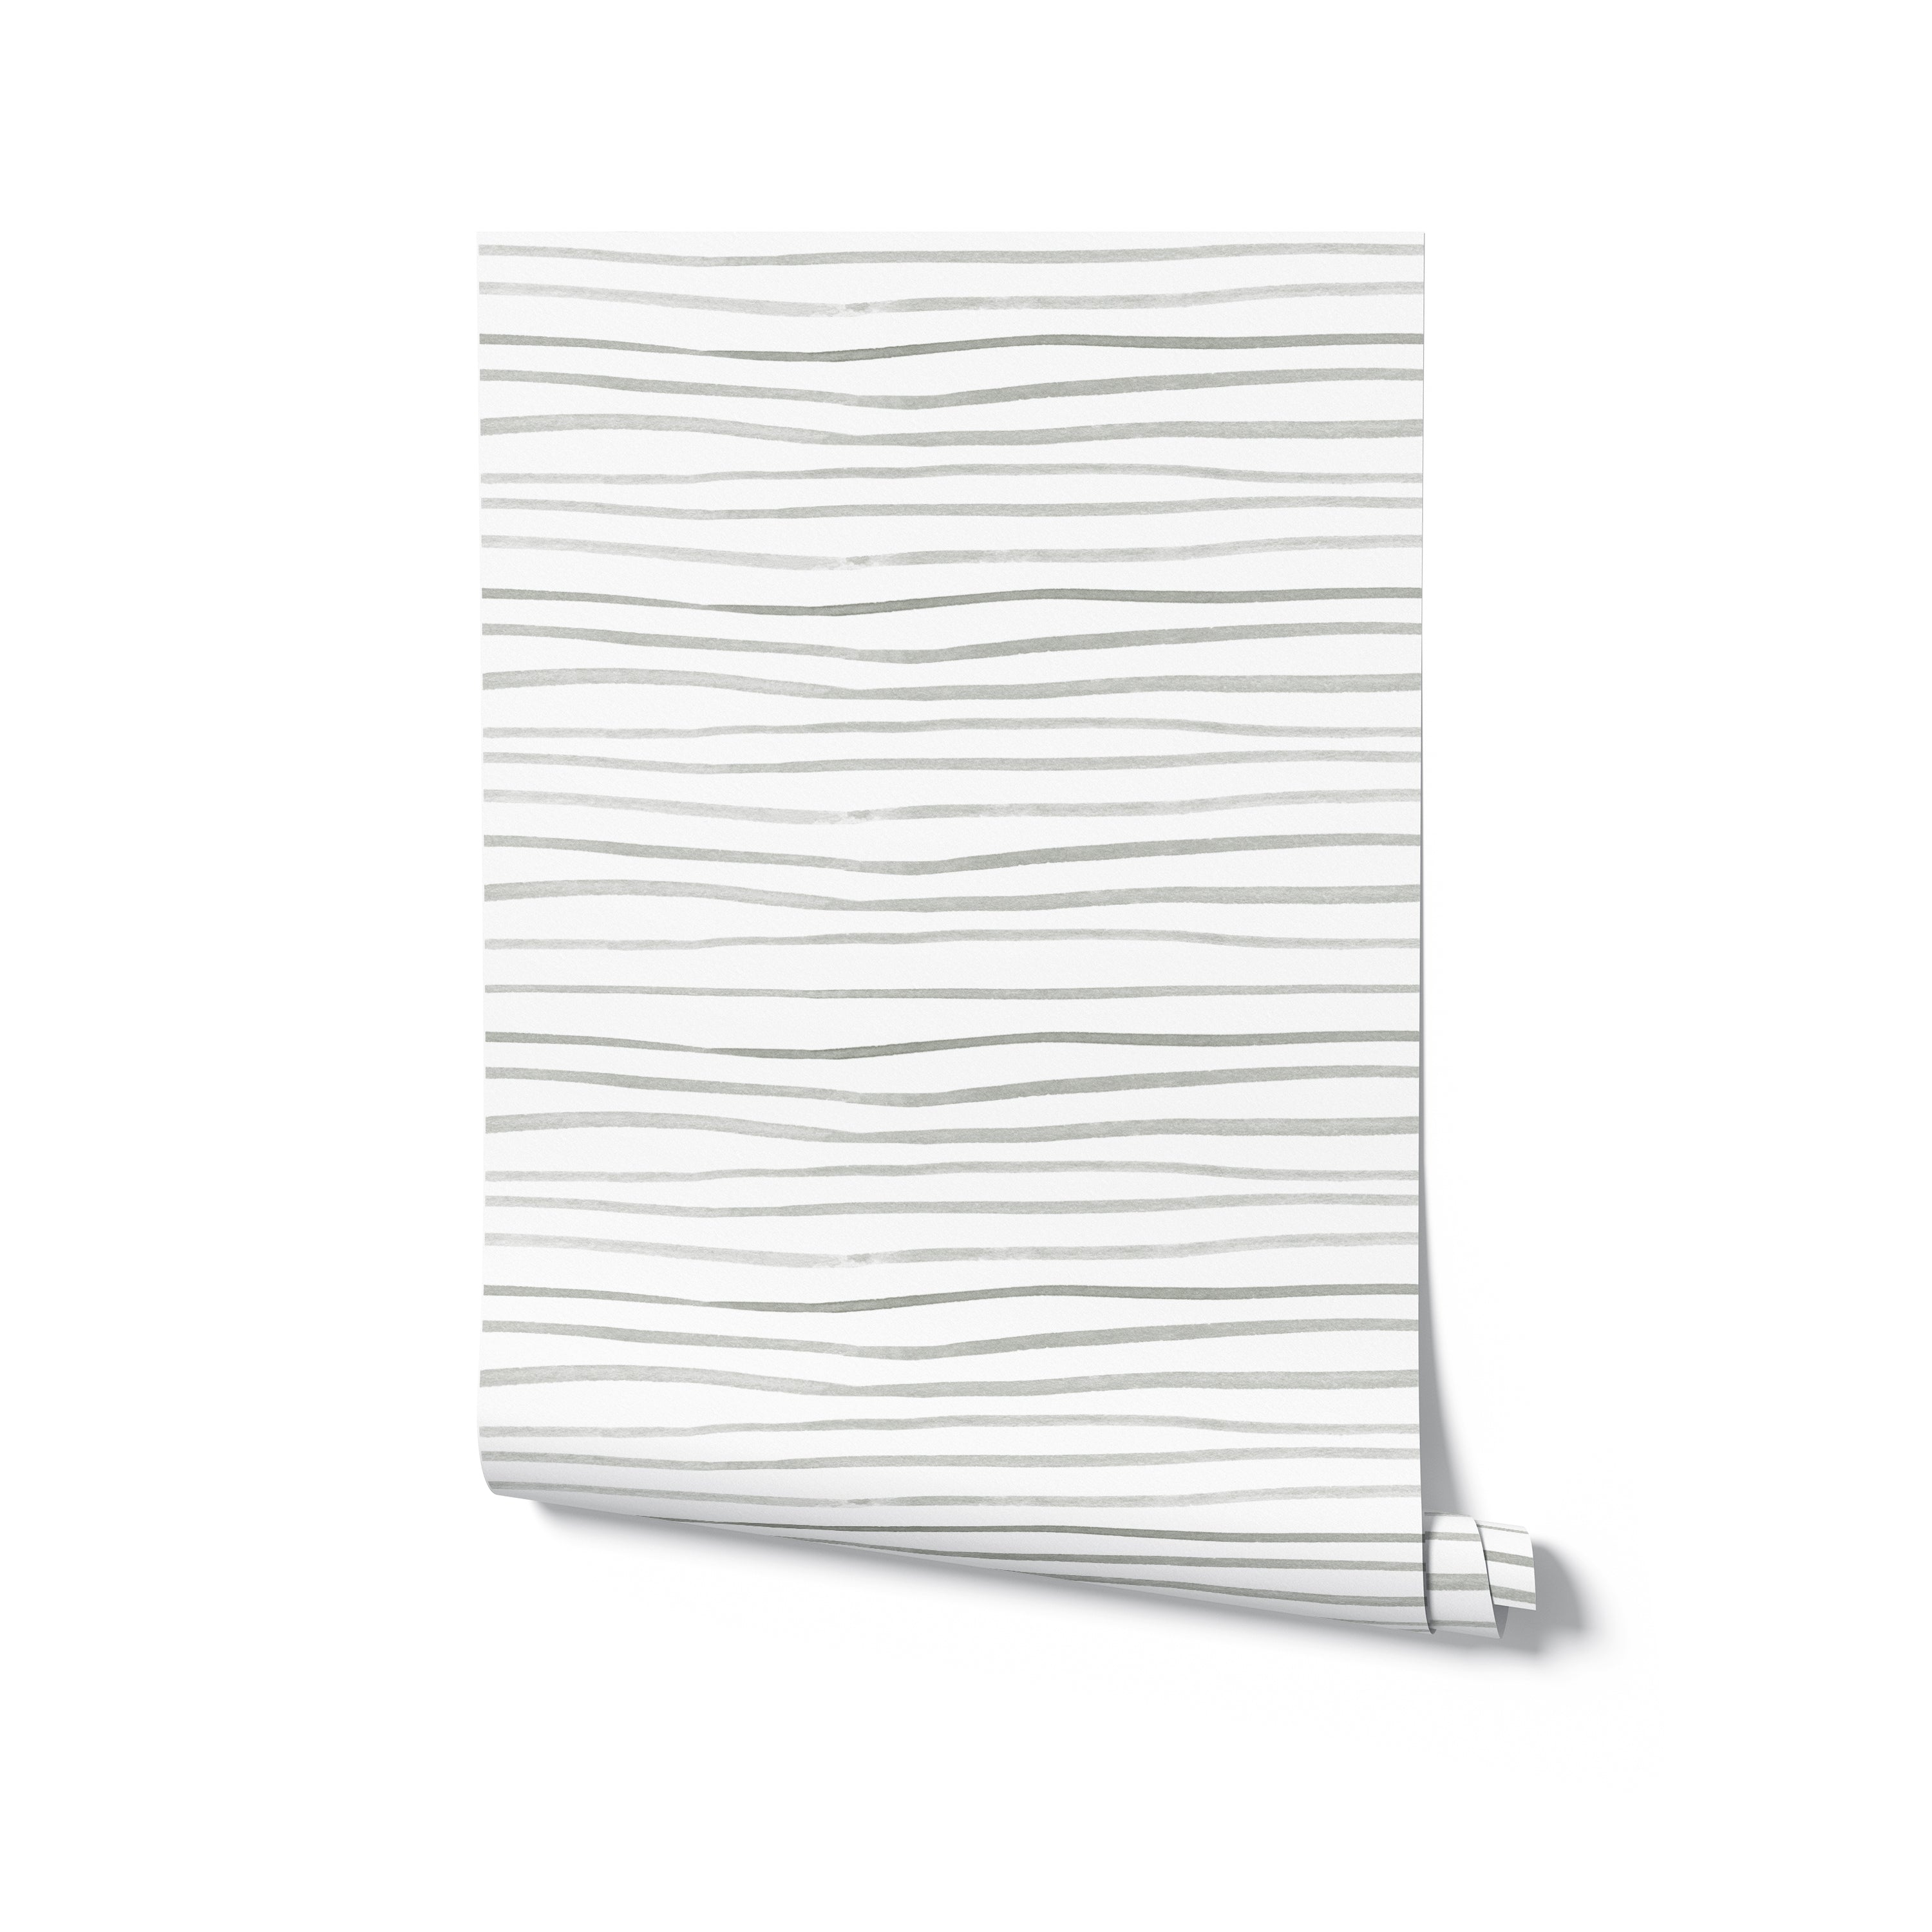 A roll of wallpaper showcasing minimalistic gray brush stroke lines on a white background, ideal for creating a modern and understated look in any space.